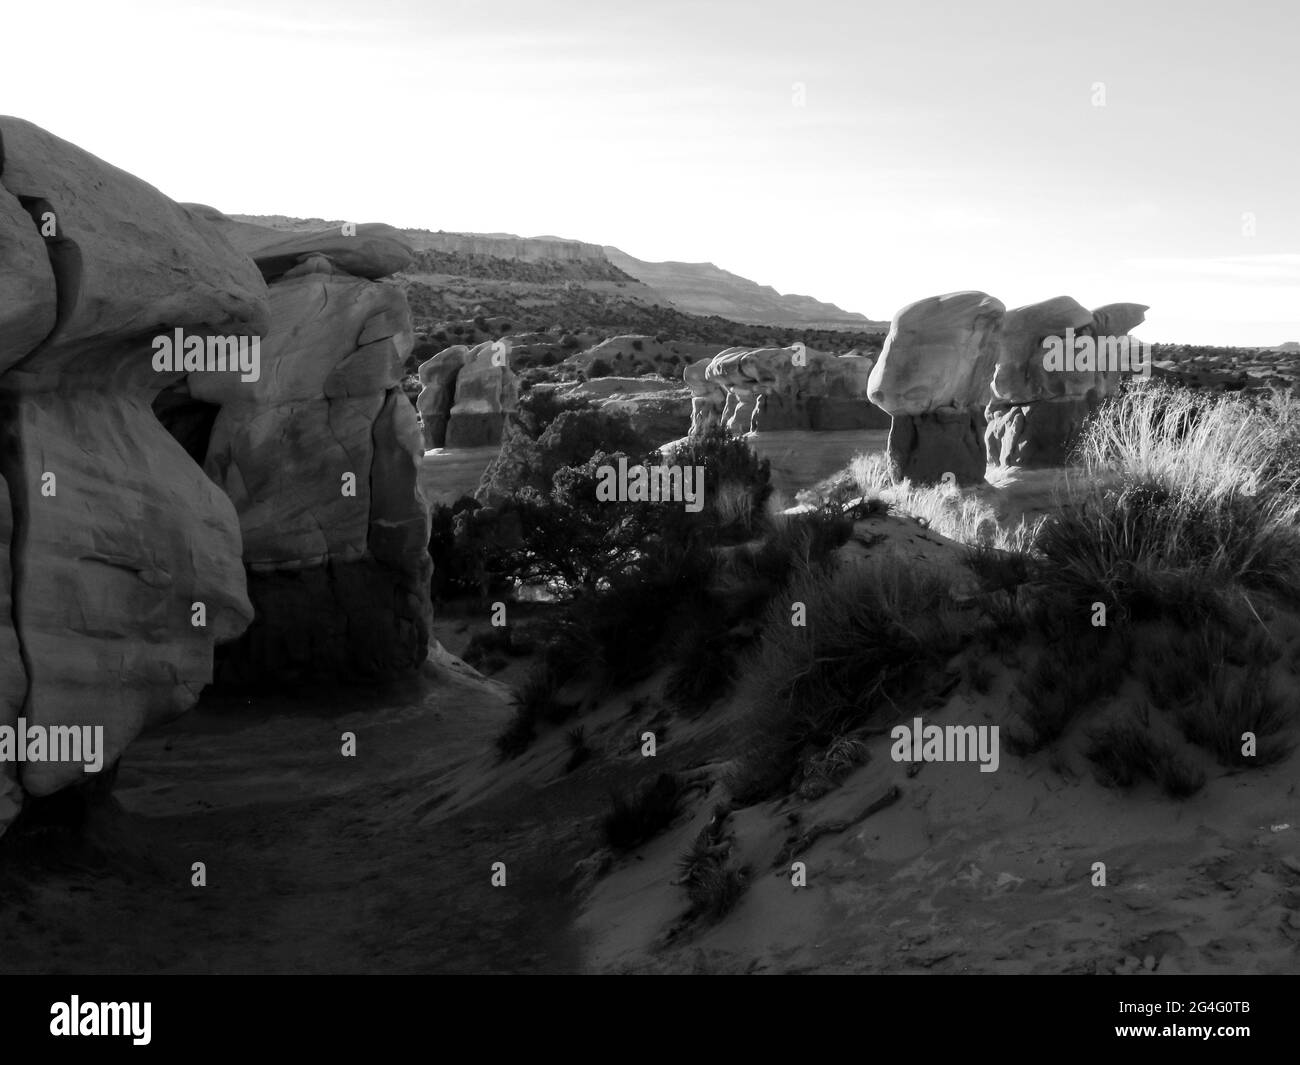 Devil’s garden, an area filled with sandstone hoodoos, in Escalante, Utah, USA, in Black and White in the last sun of the afternoon Stock Photo